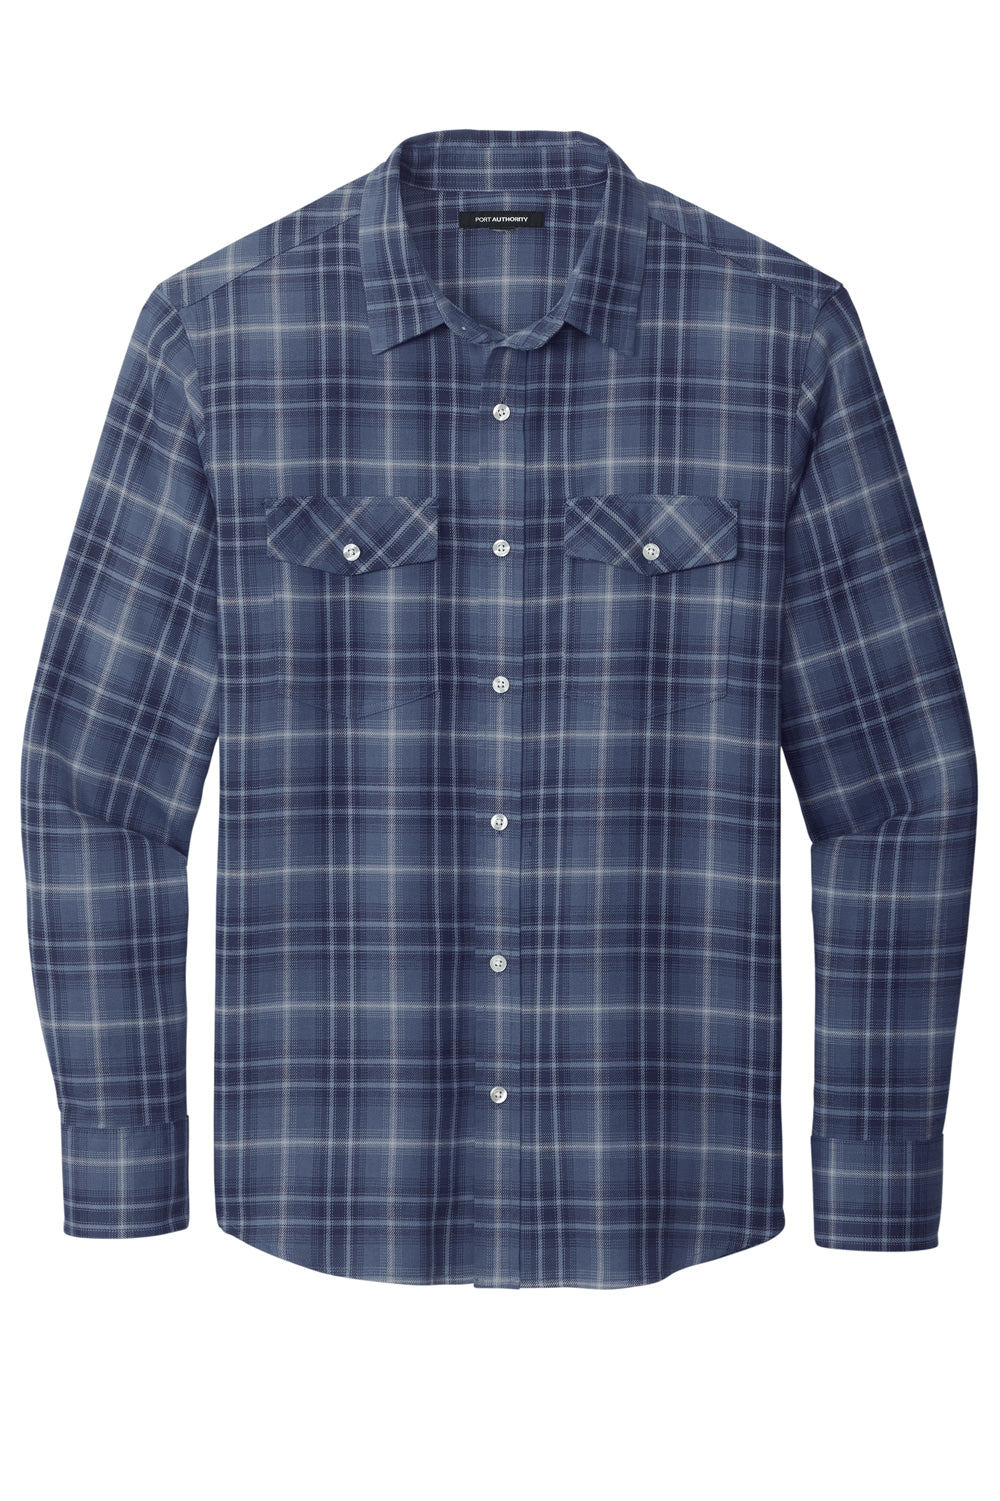 Port Authority W672 Ombre Plaid Long Sleeve Button Down Shirt True Navy Blue Flat Front